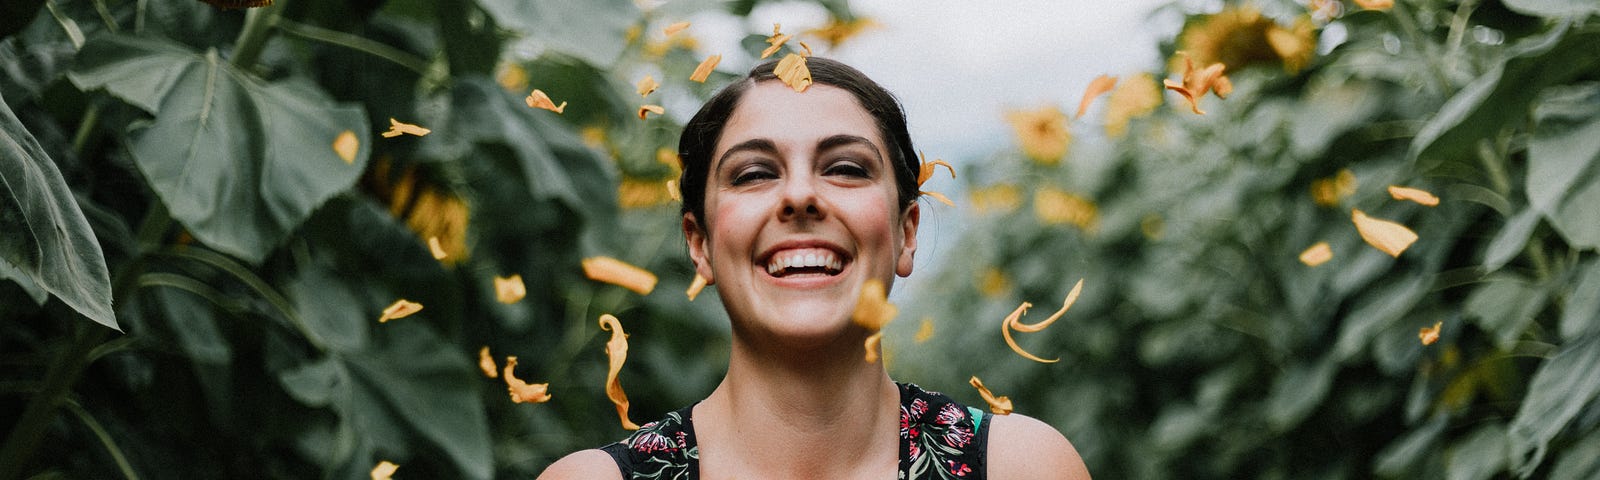 Image of woman laughing surrounded by plants and petals.